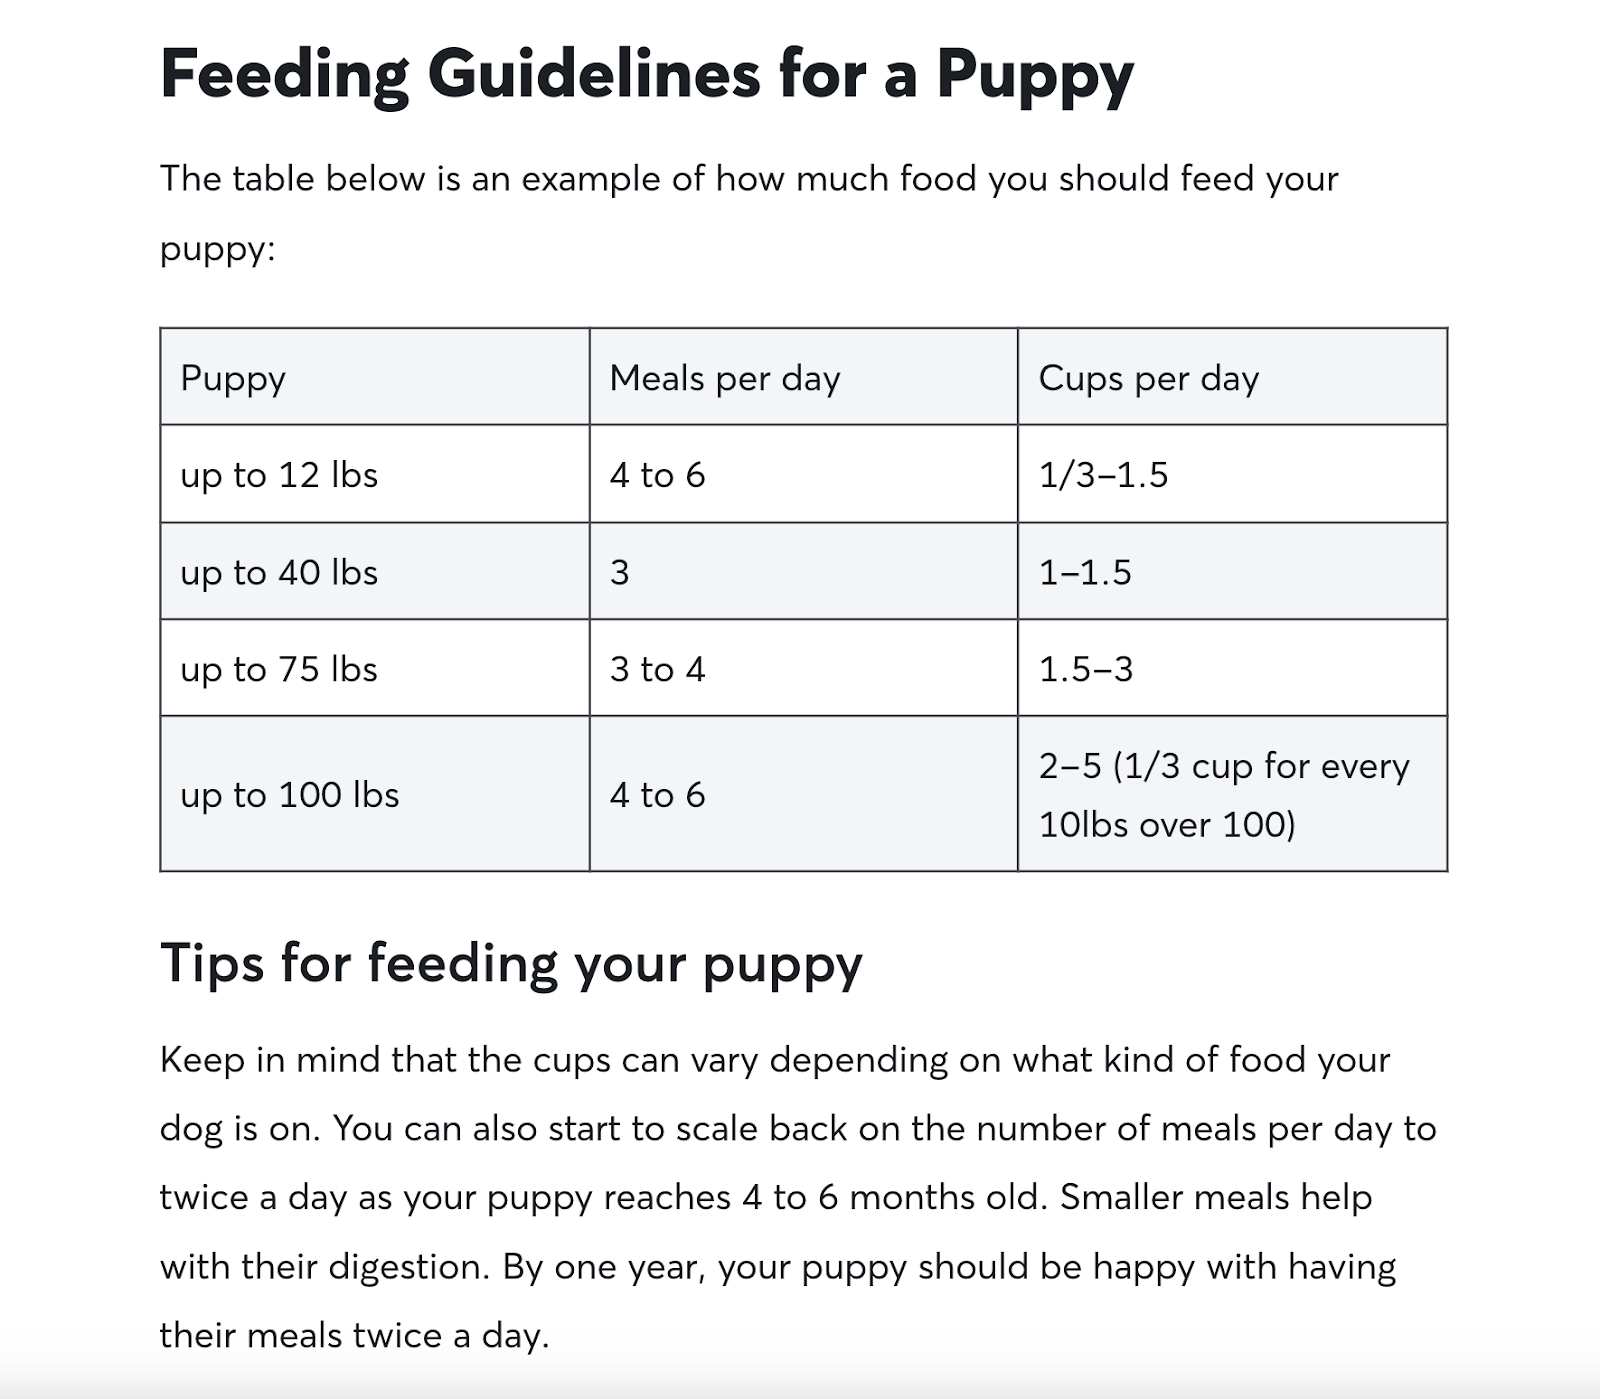 A array  successful  Rover’s canine  feeding guide, showing feeding guidelines for antithetic  puppy sizes